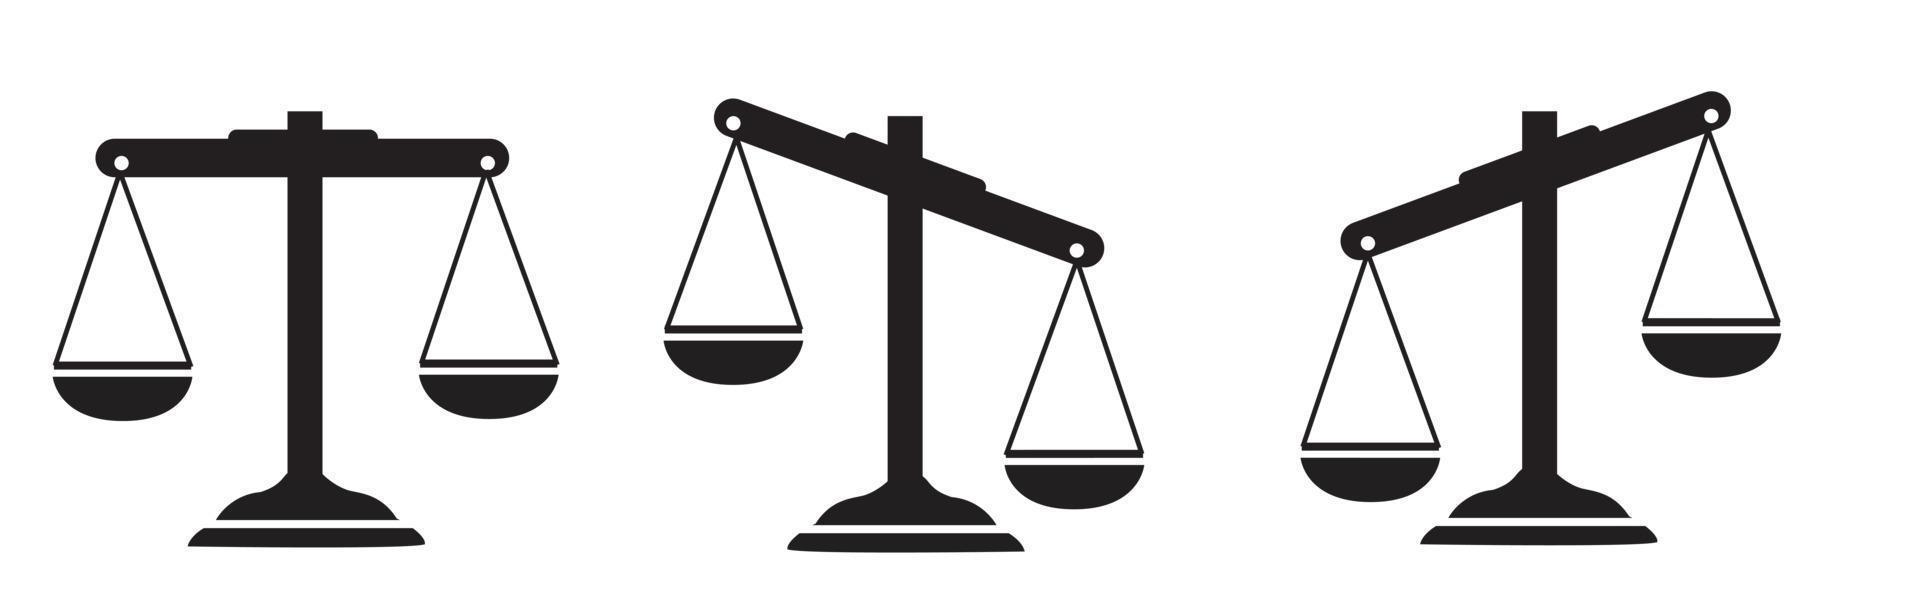 Justice scales icons set . Scales icon collection. Law scale icon vector